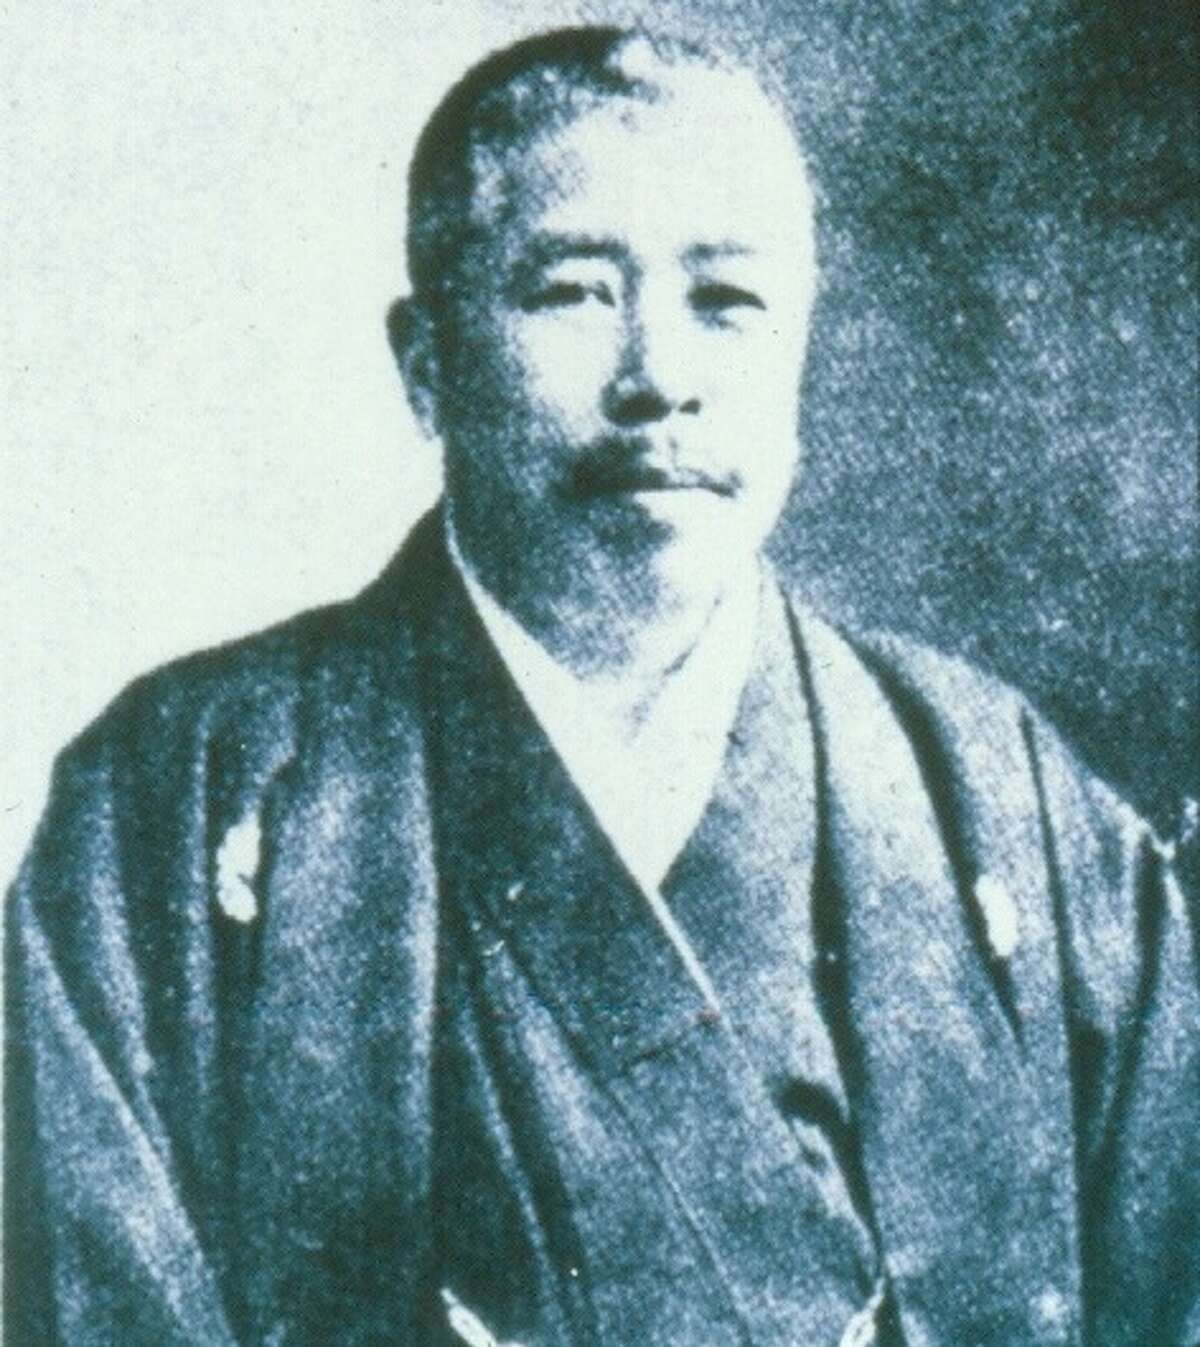 Shigetaka Shiga, a world traveler and geography professor in Japan, single-handedly underwrote and oversaw the production and transport of the Japanese Monument that was dedicated at the Alamo in 1914. This image was provided by his granddaughter for a 75-year anniversary of the monument in 1989.